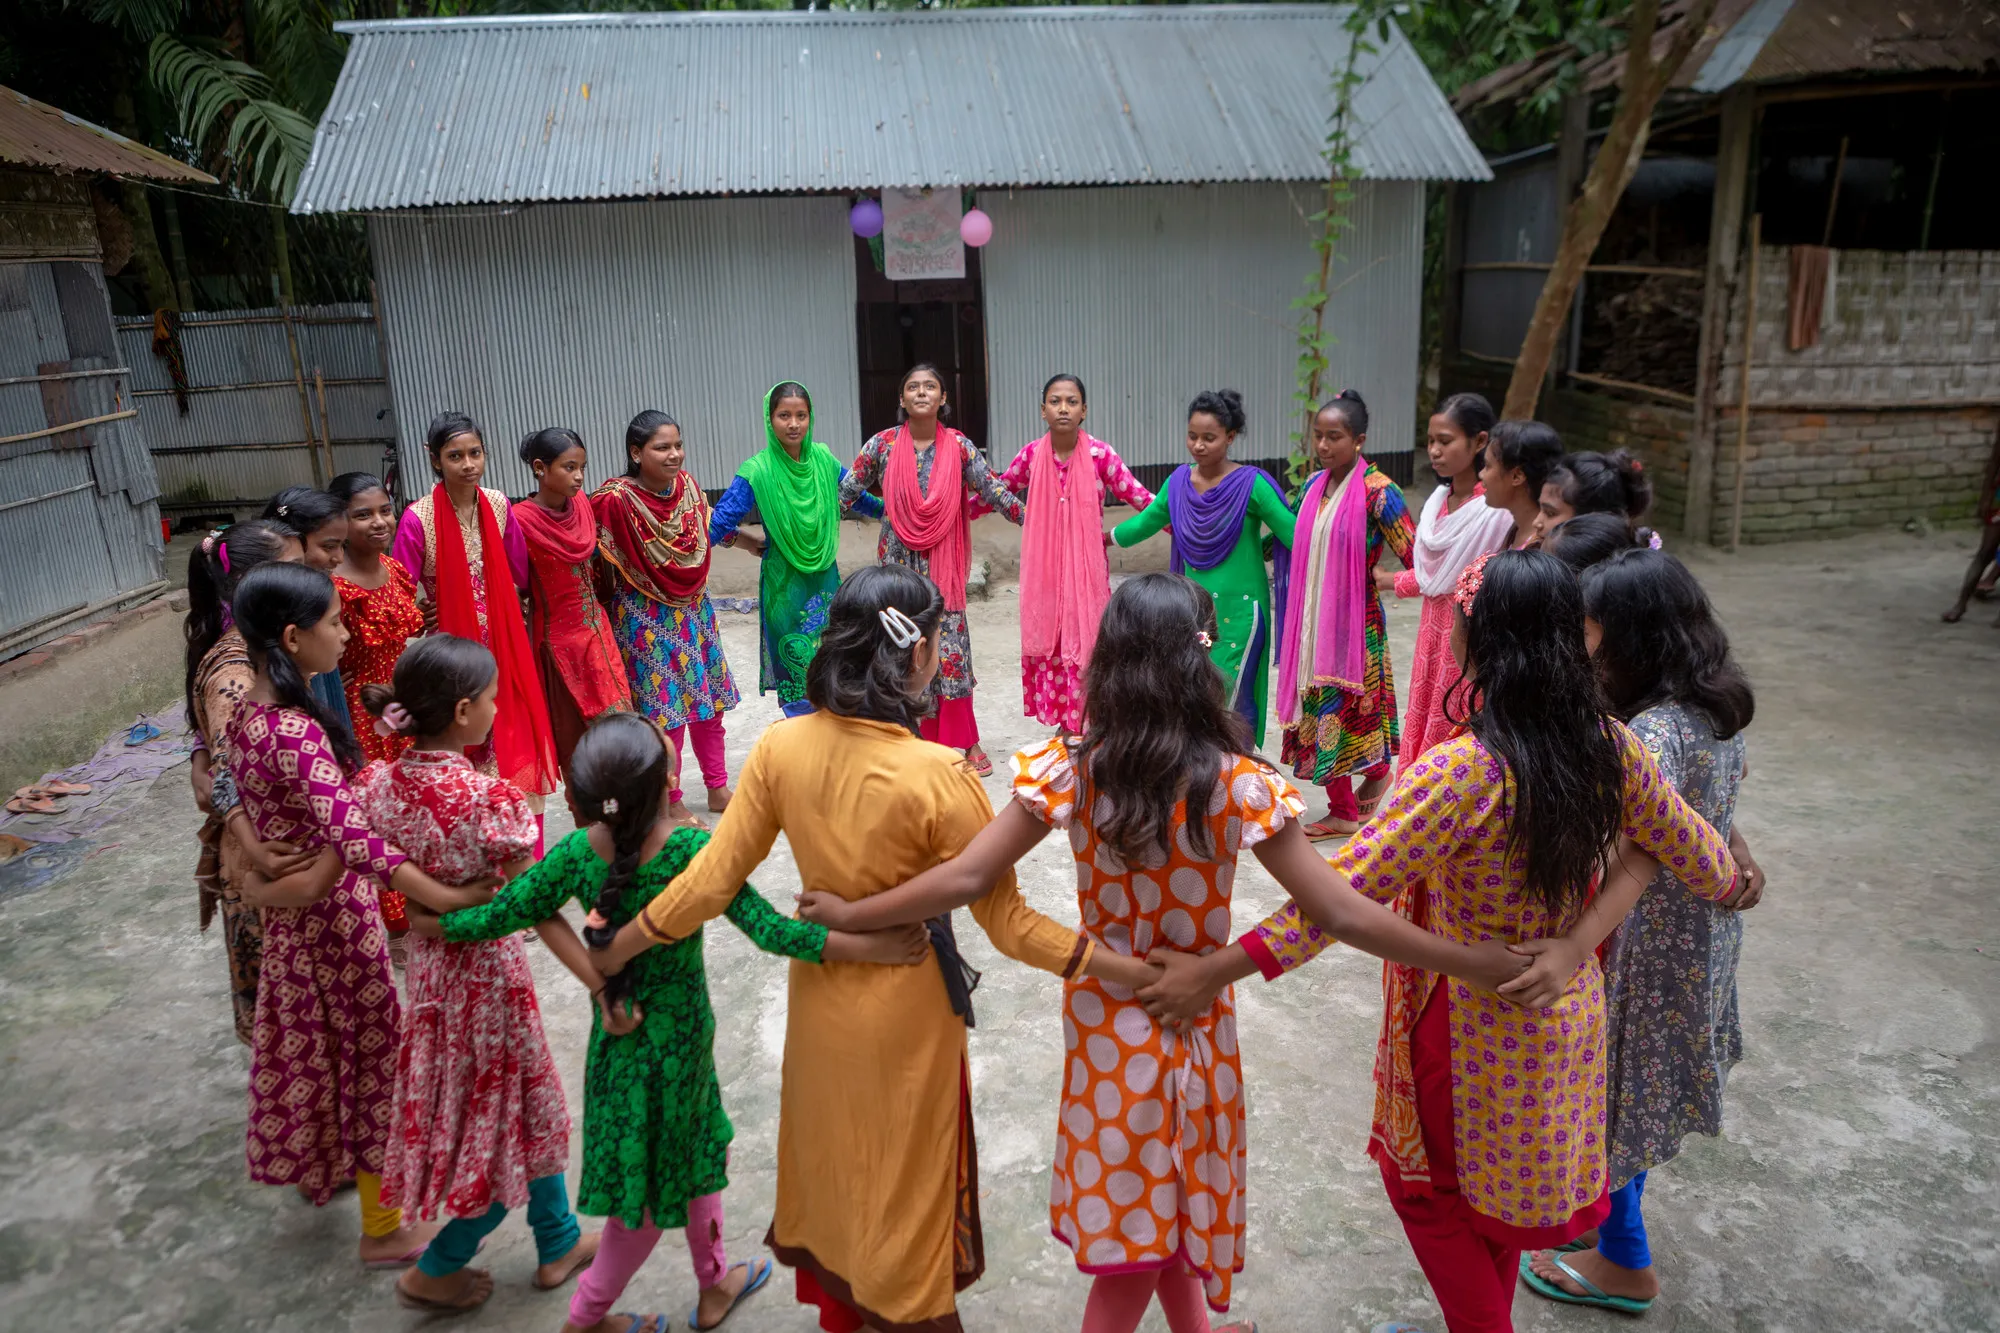 A group of adolescent girls stand in a circle outdoors in a village.